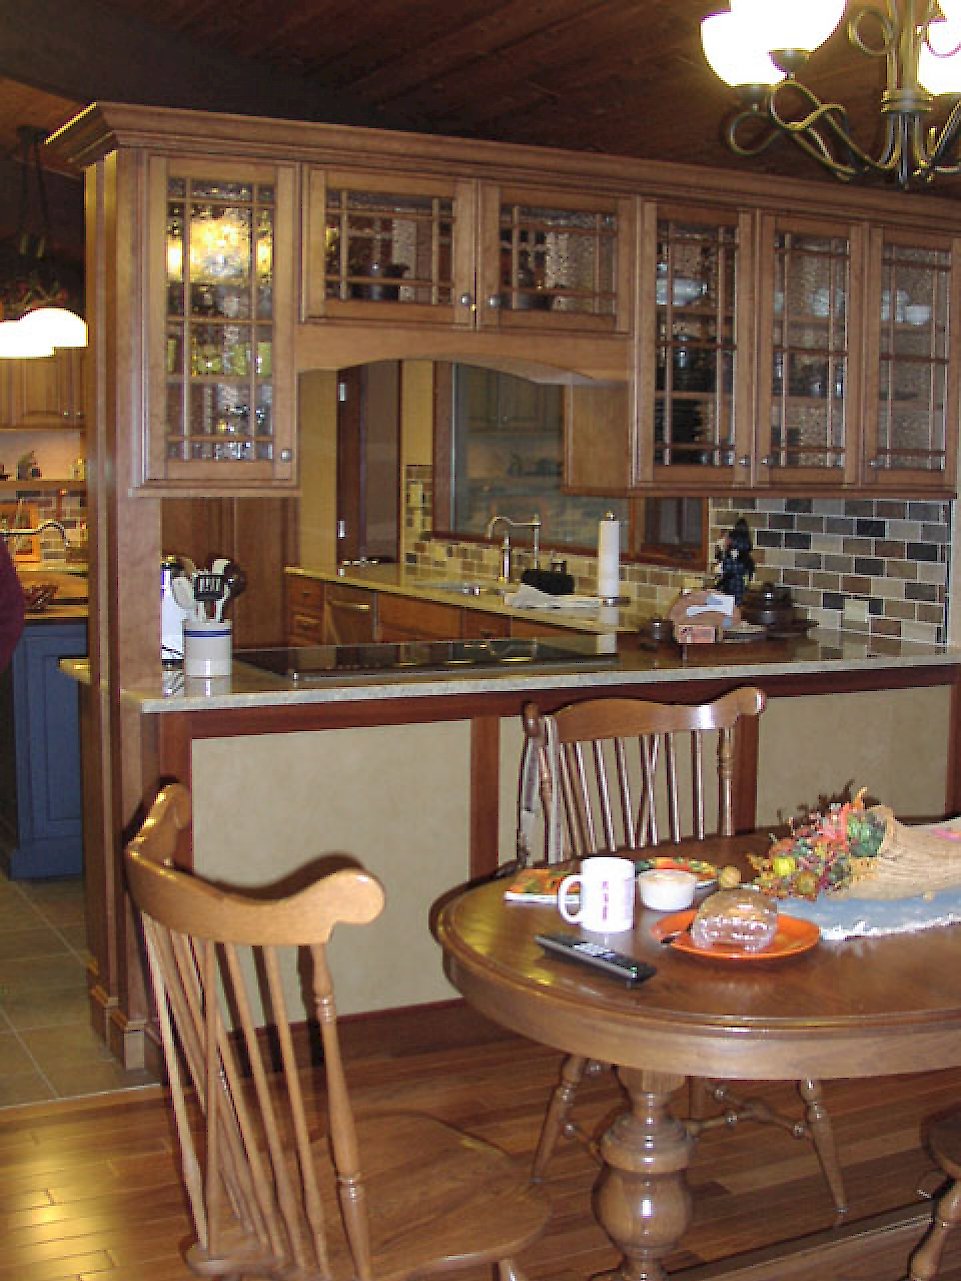 View of the kitchen peninsula with an electric cooktop.